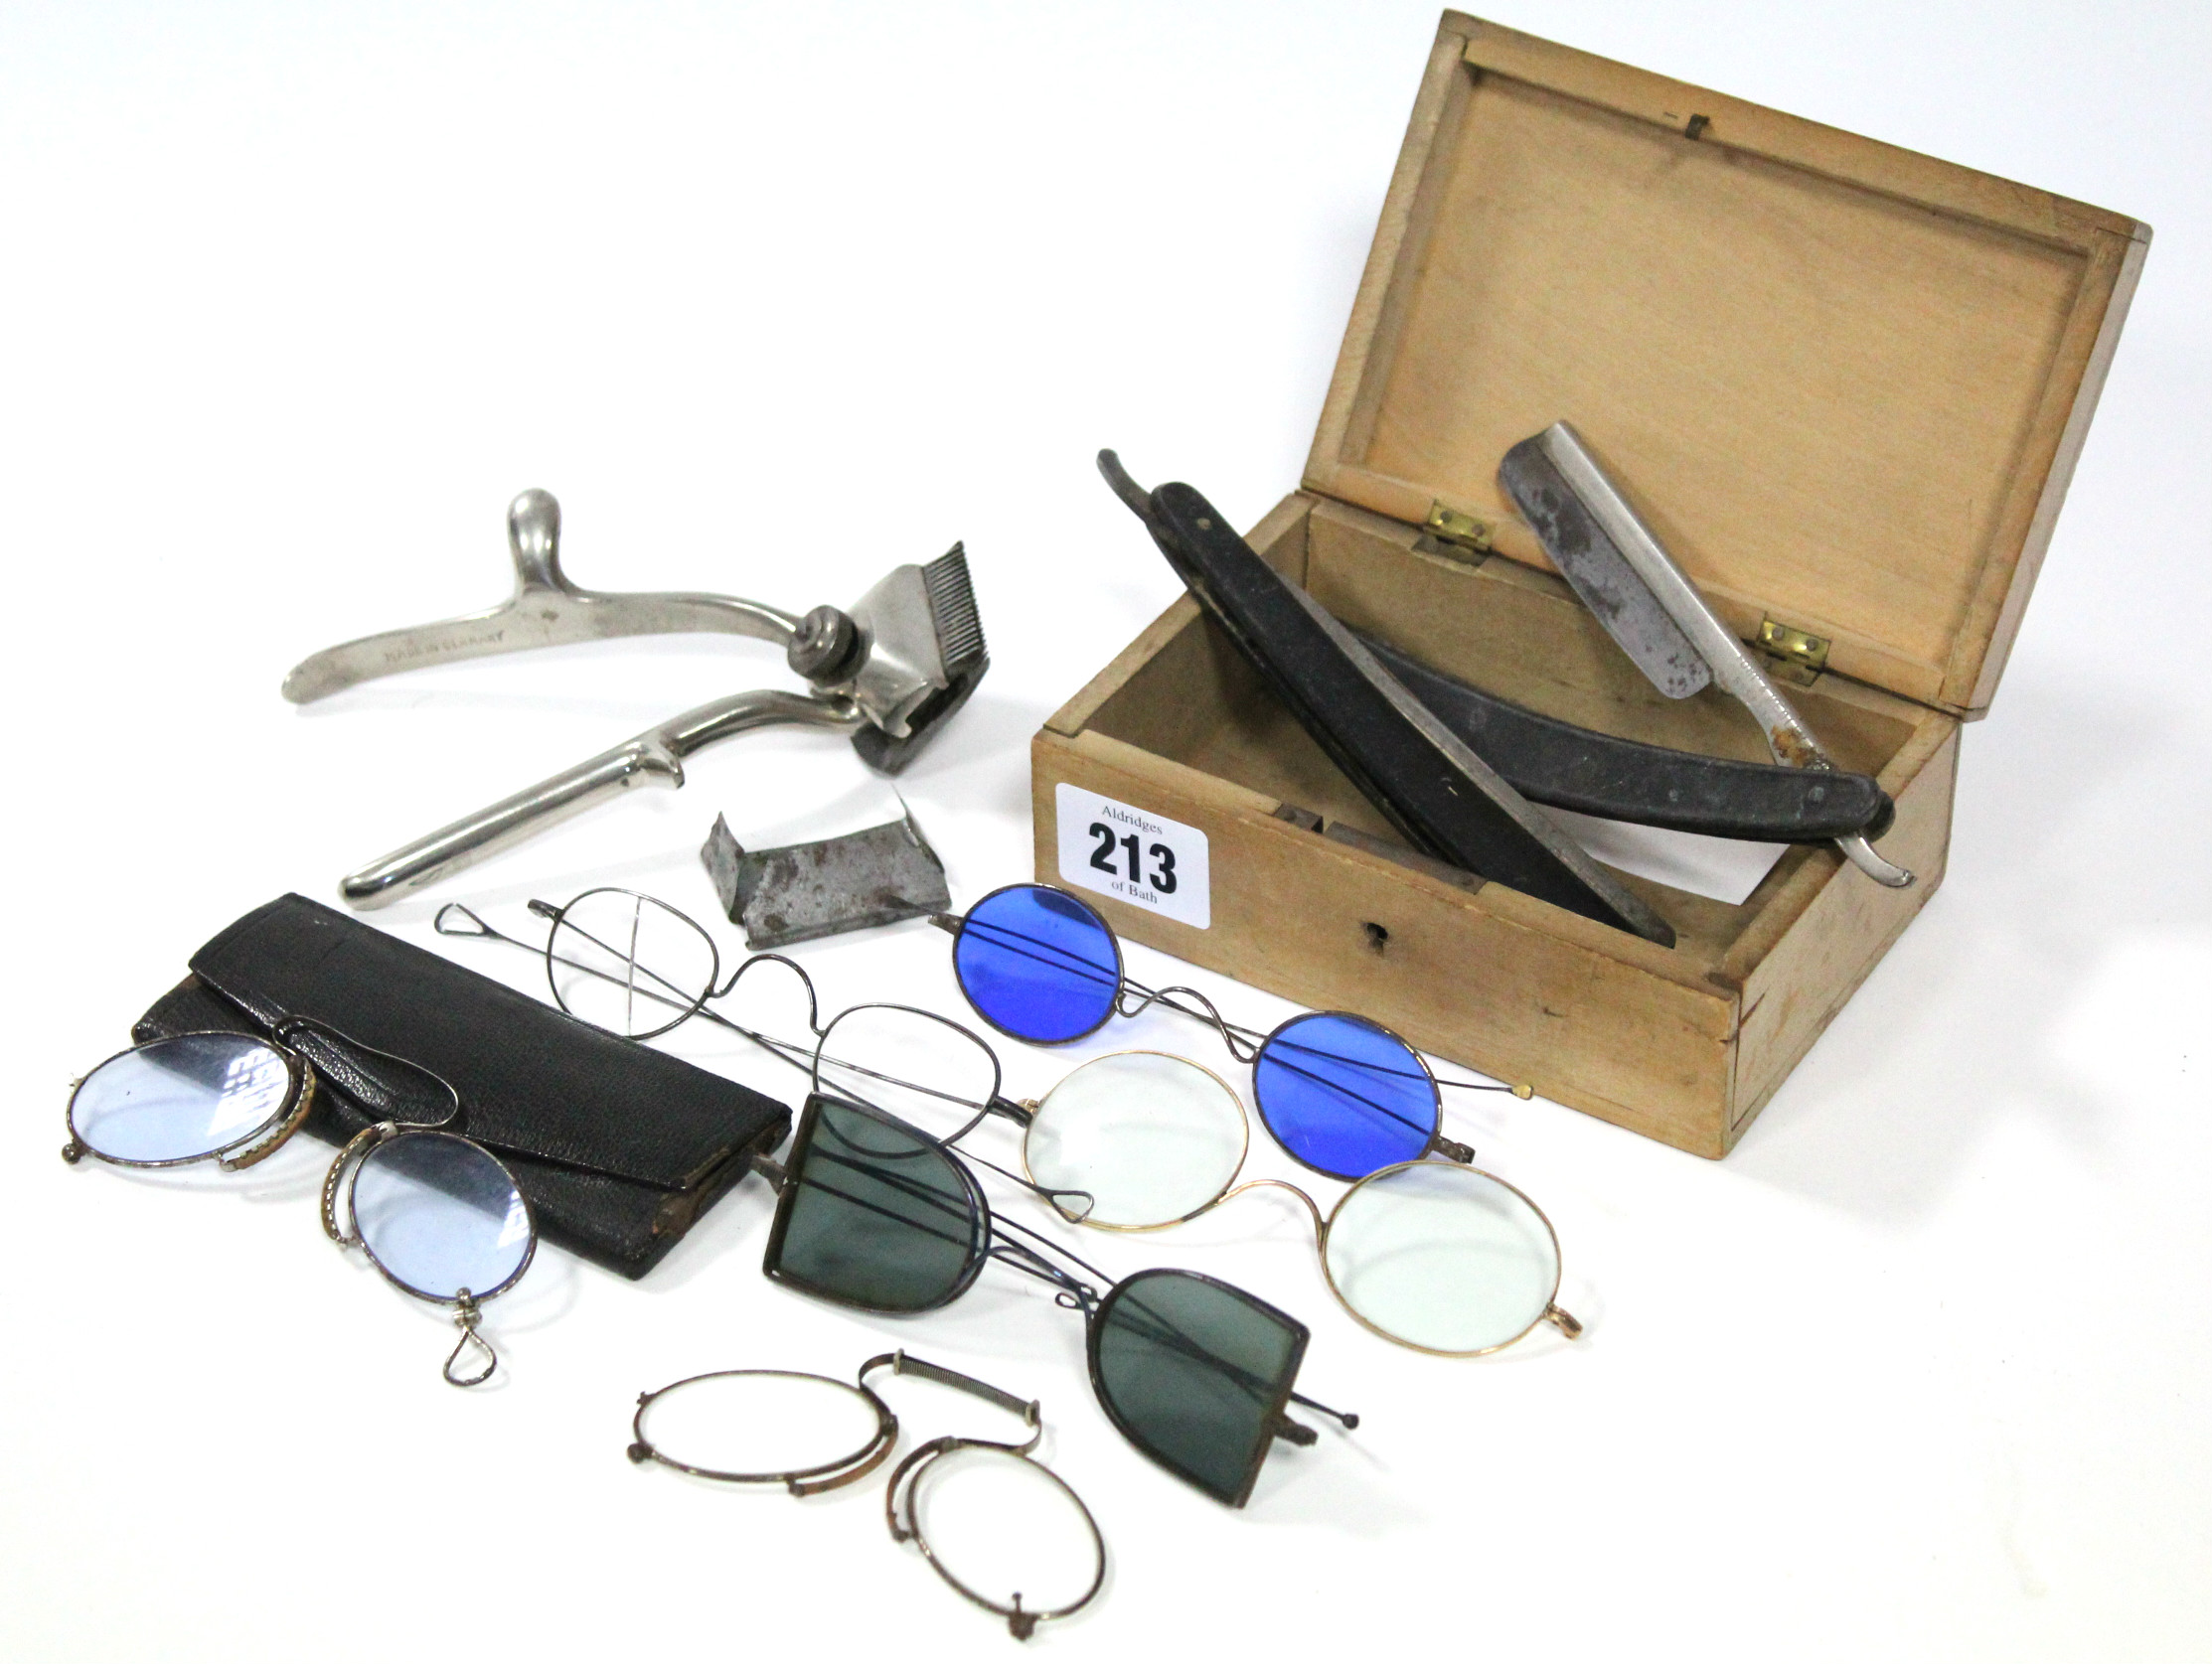 A pair of late 19th/early 20th century steel-frame spectacles with blue-tinted lenses having